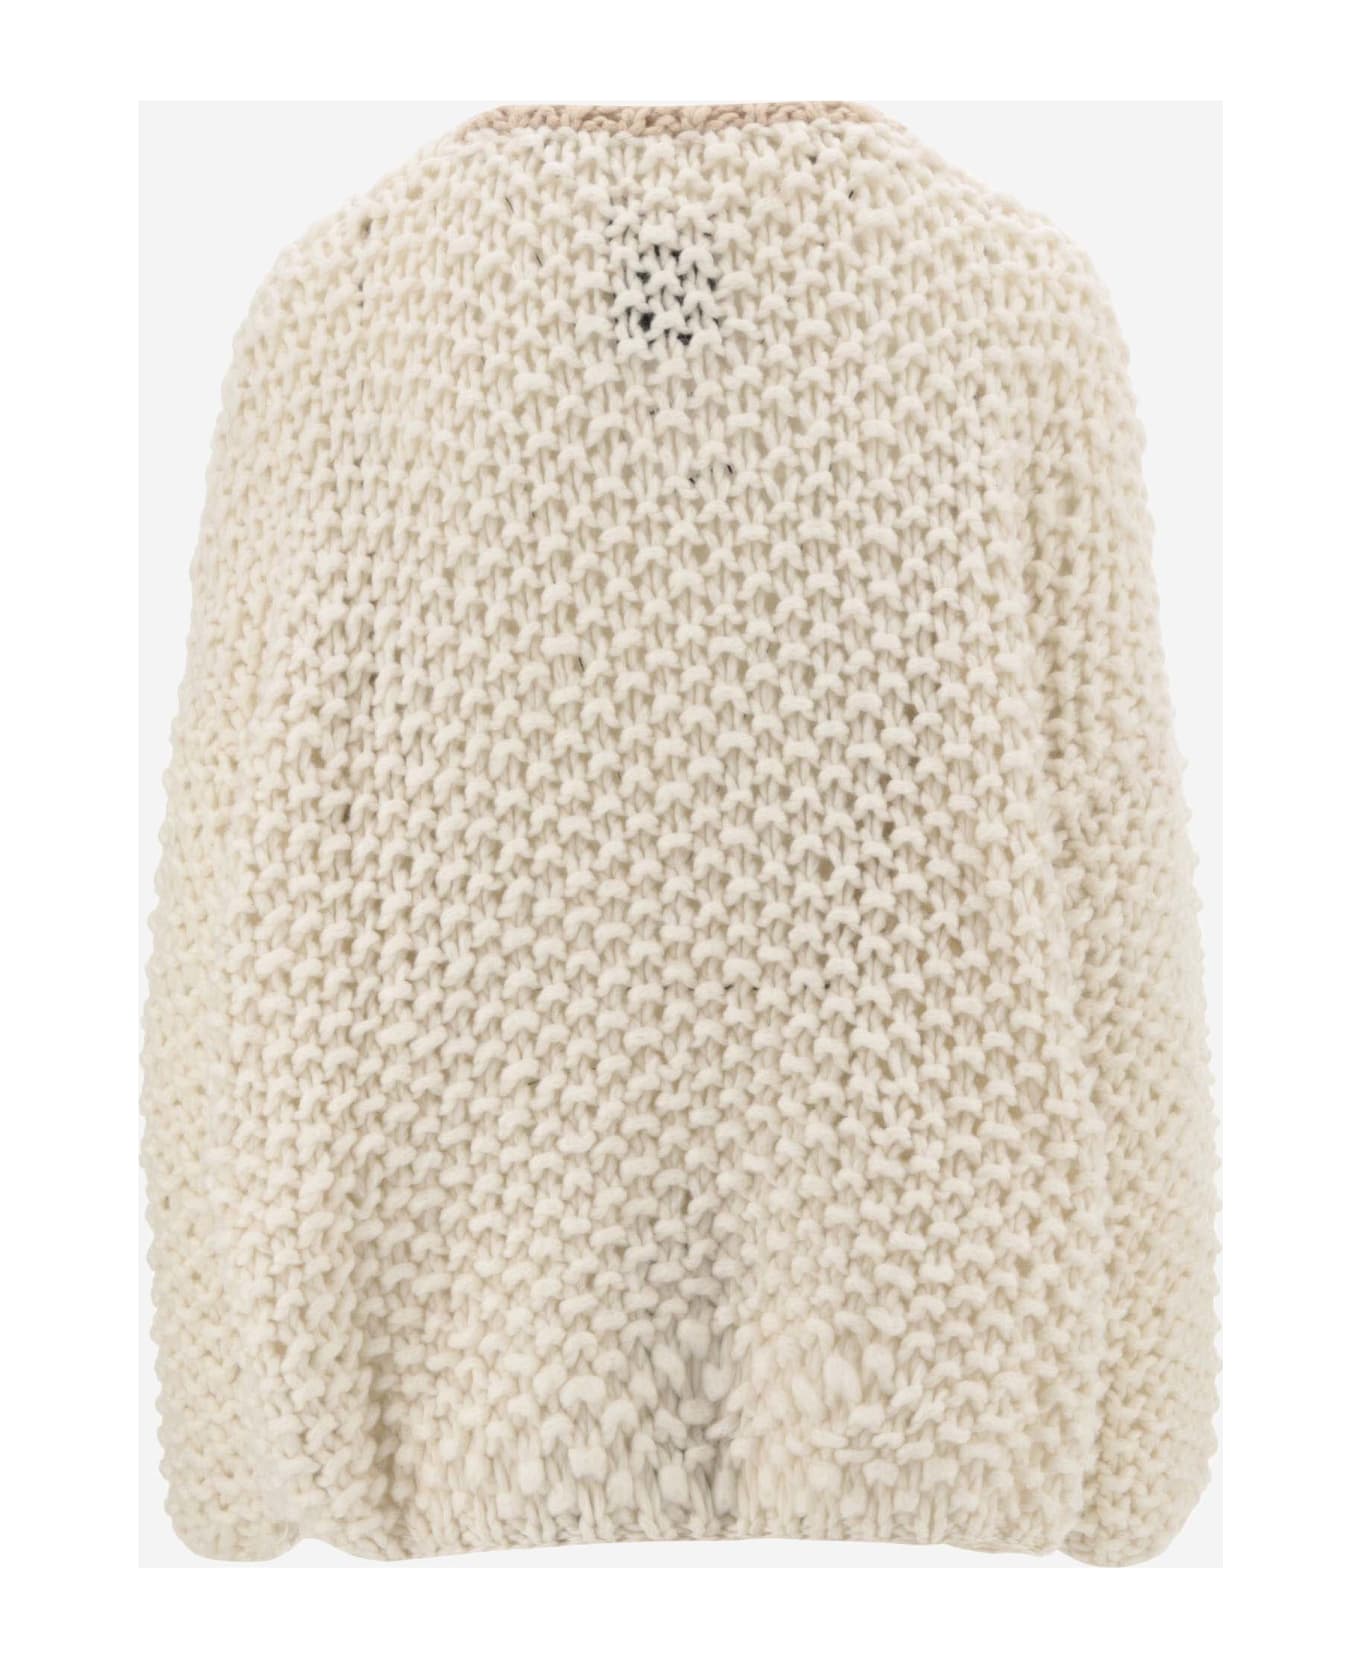 Evyinit Merino Wool Blend Sweater With Contrasting Edges - Ivory